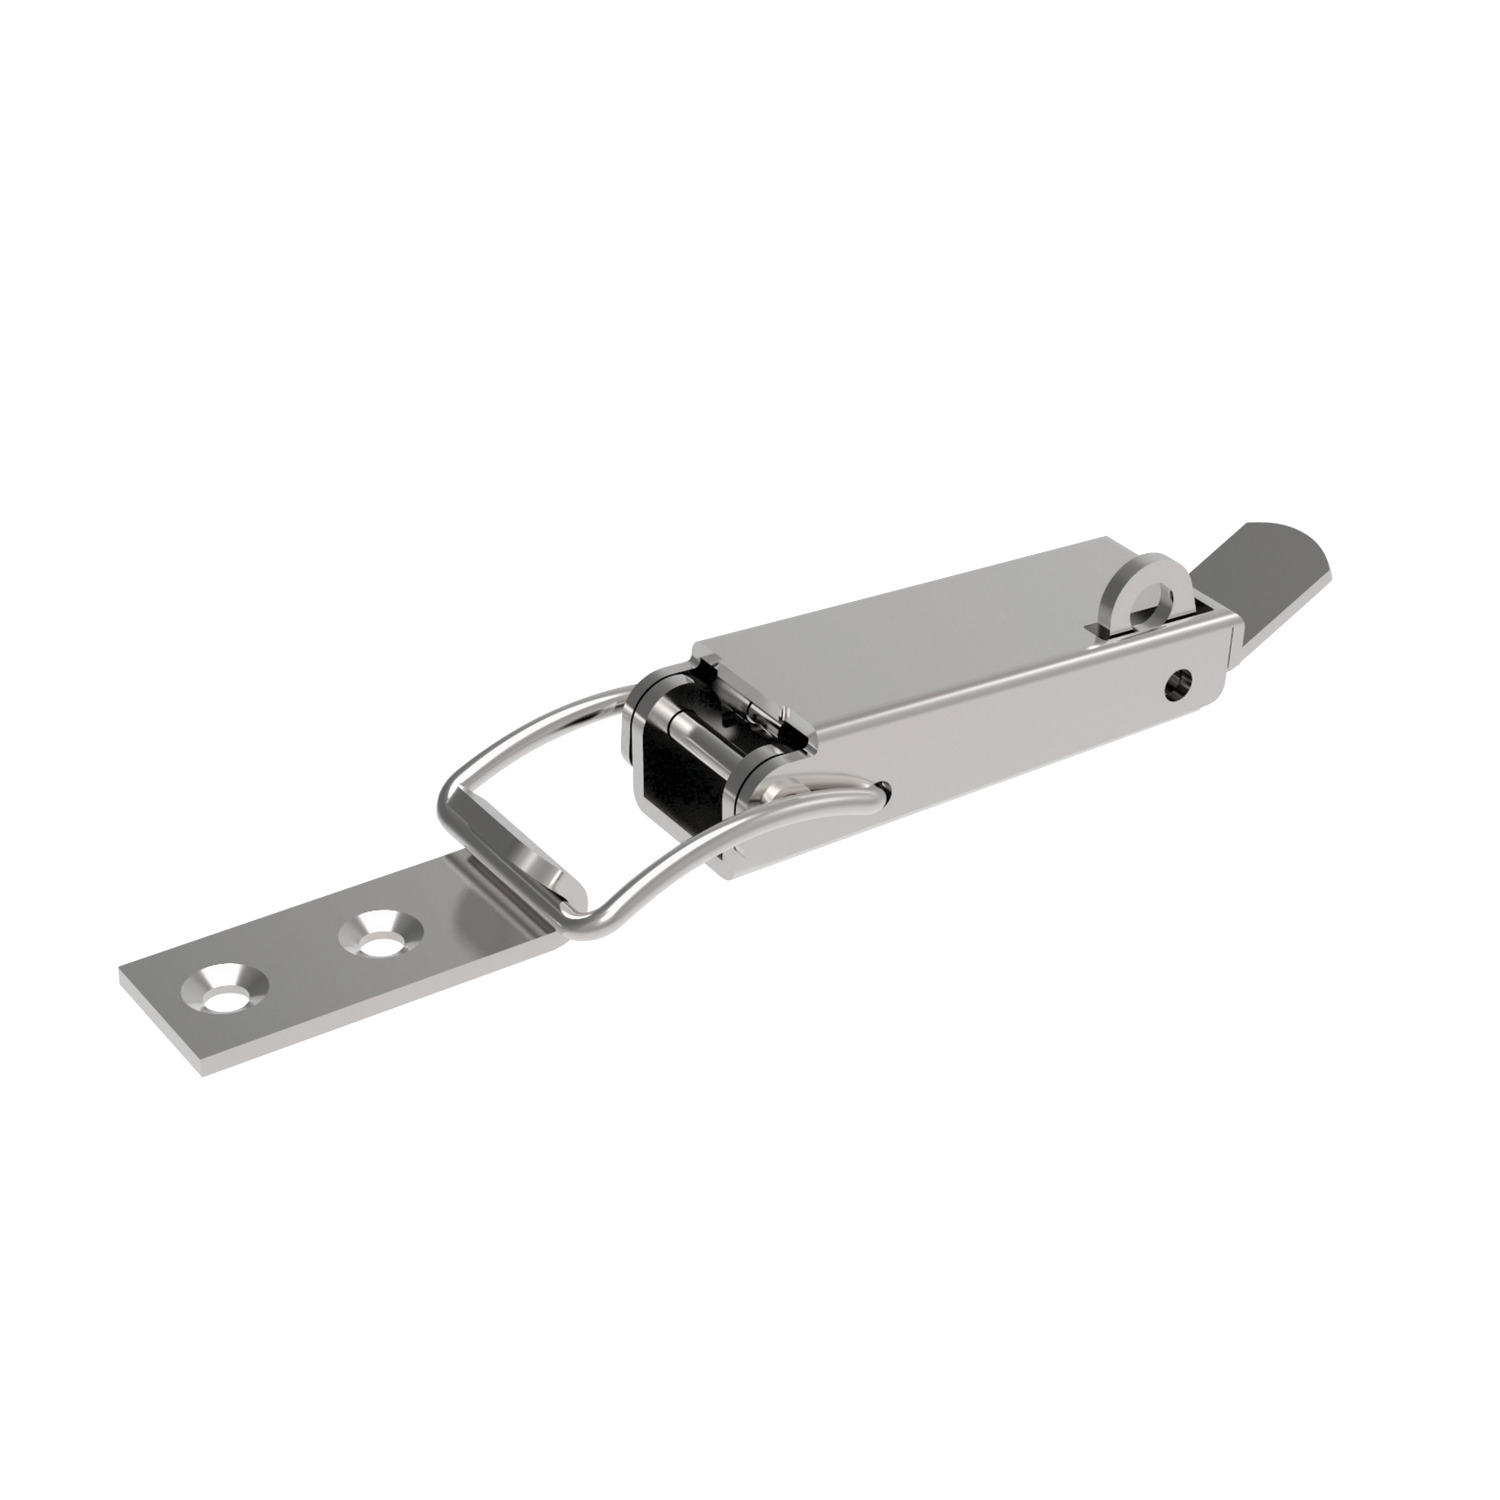 Toggle Latches Steel or stainless toggle latches with padlock shackle. Overall length of 102mm. Available and in stock today.